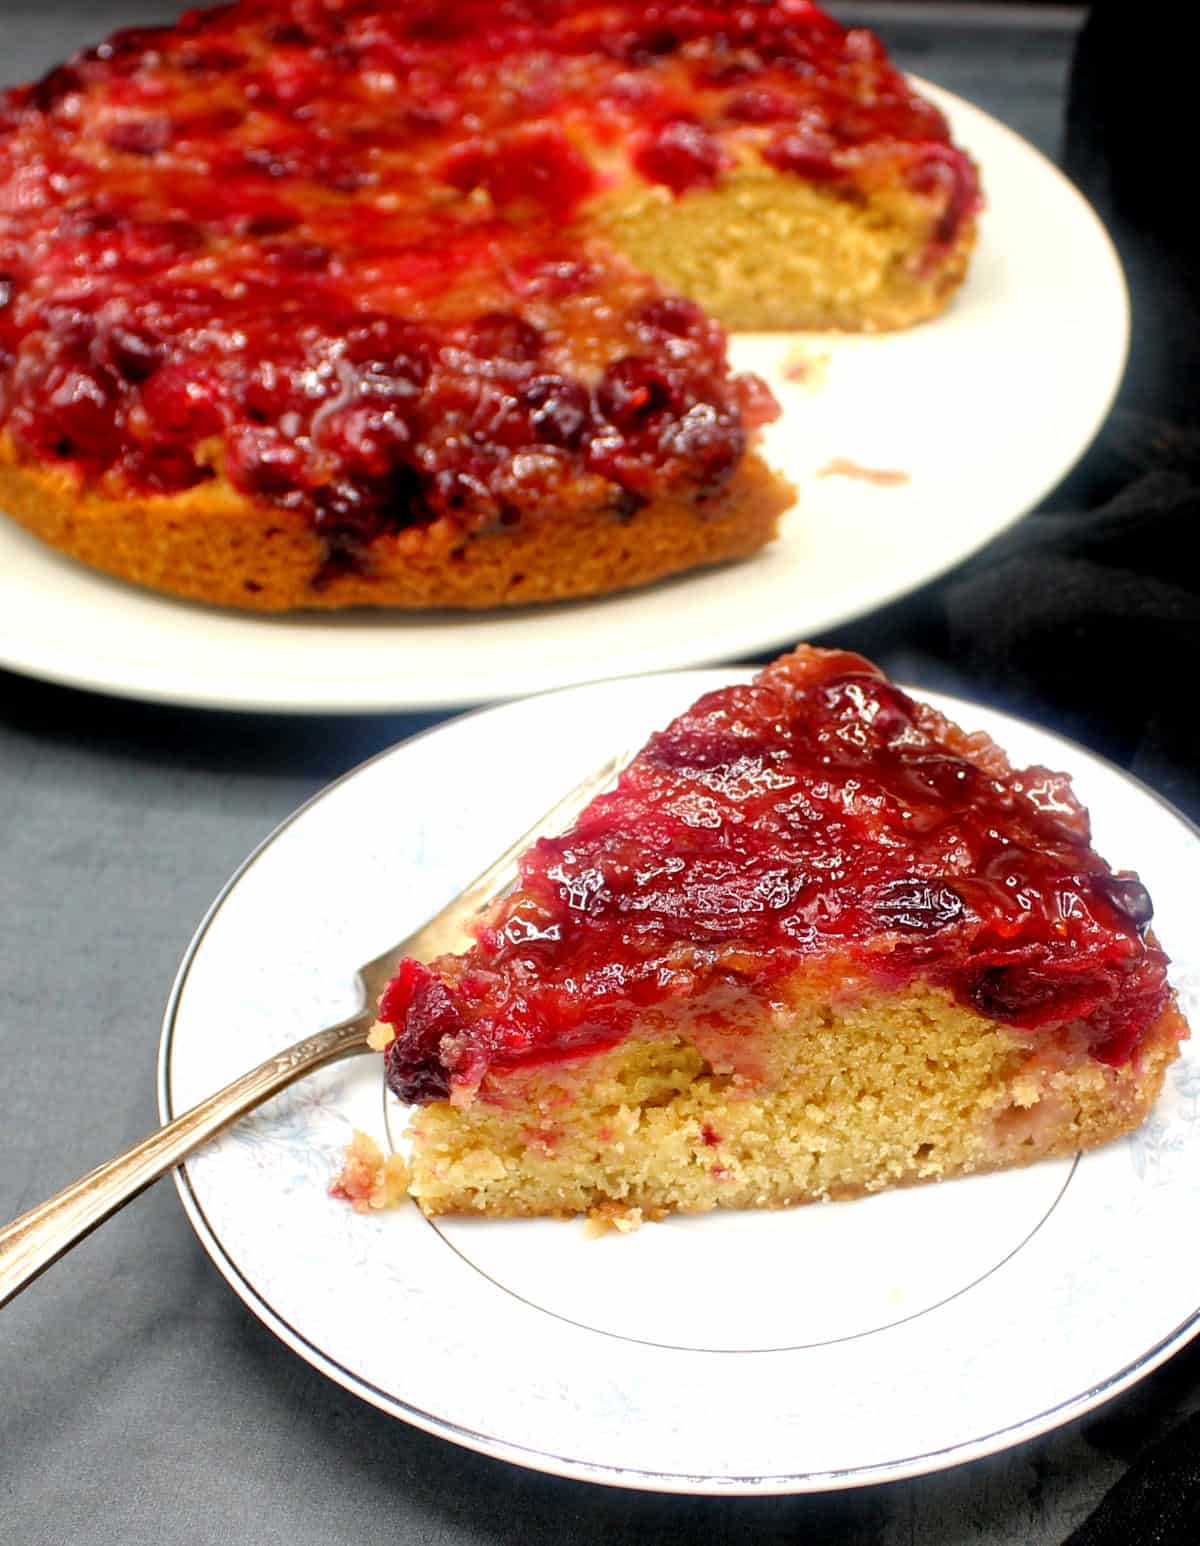 Slice of vegan cranberry upside down cake in plate with full cake in background.